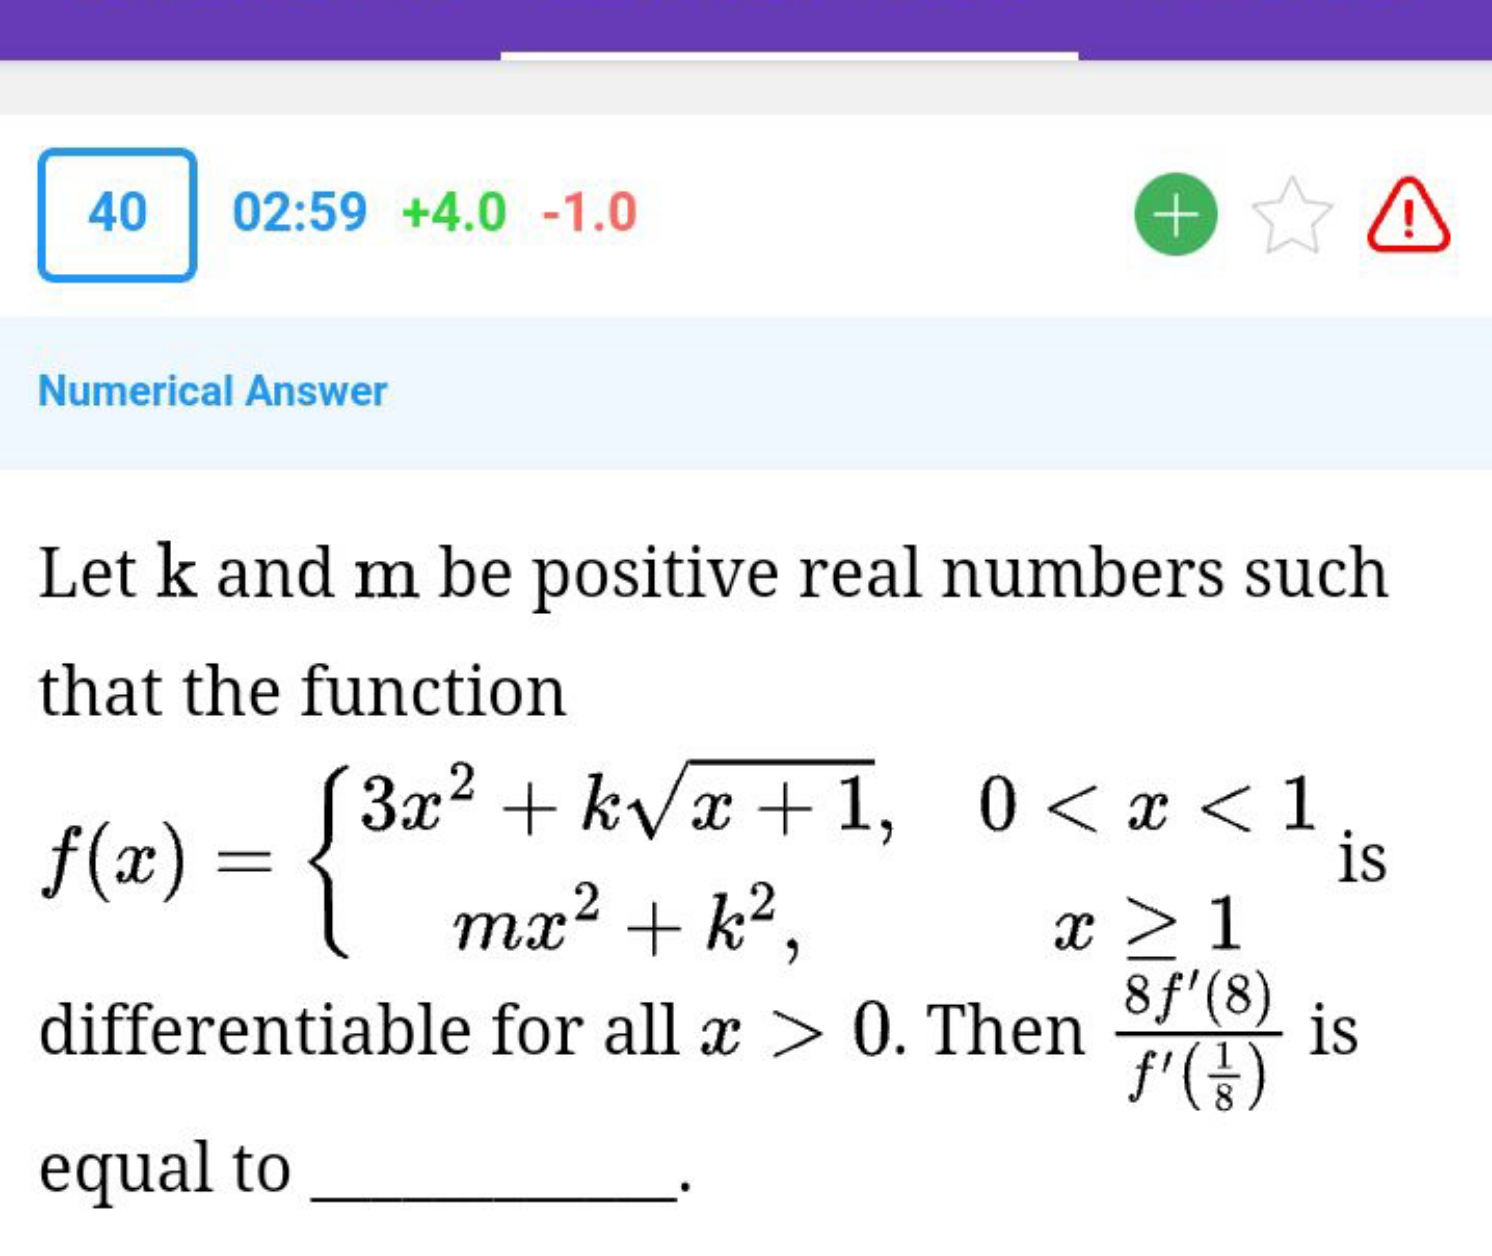 4002:59+4.0−1.0
Numerical Answer
Let k and m be positive real numbers 